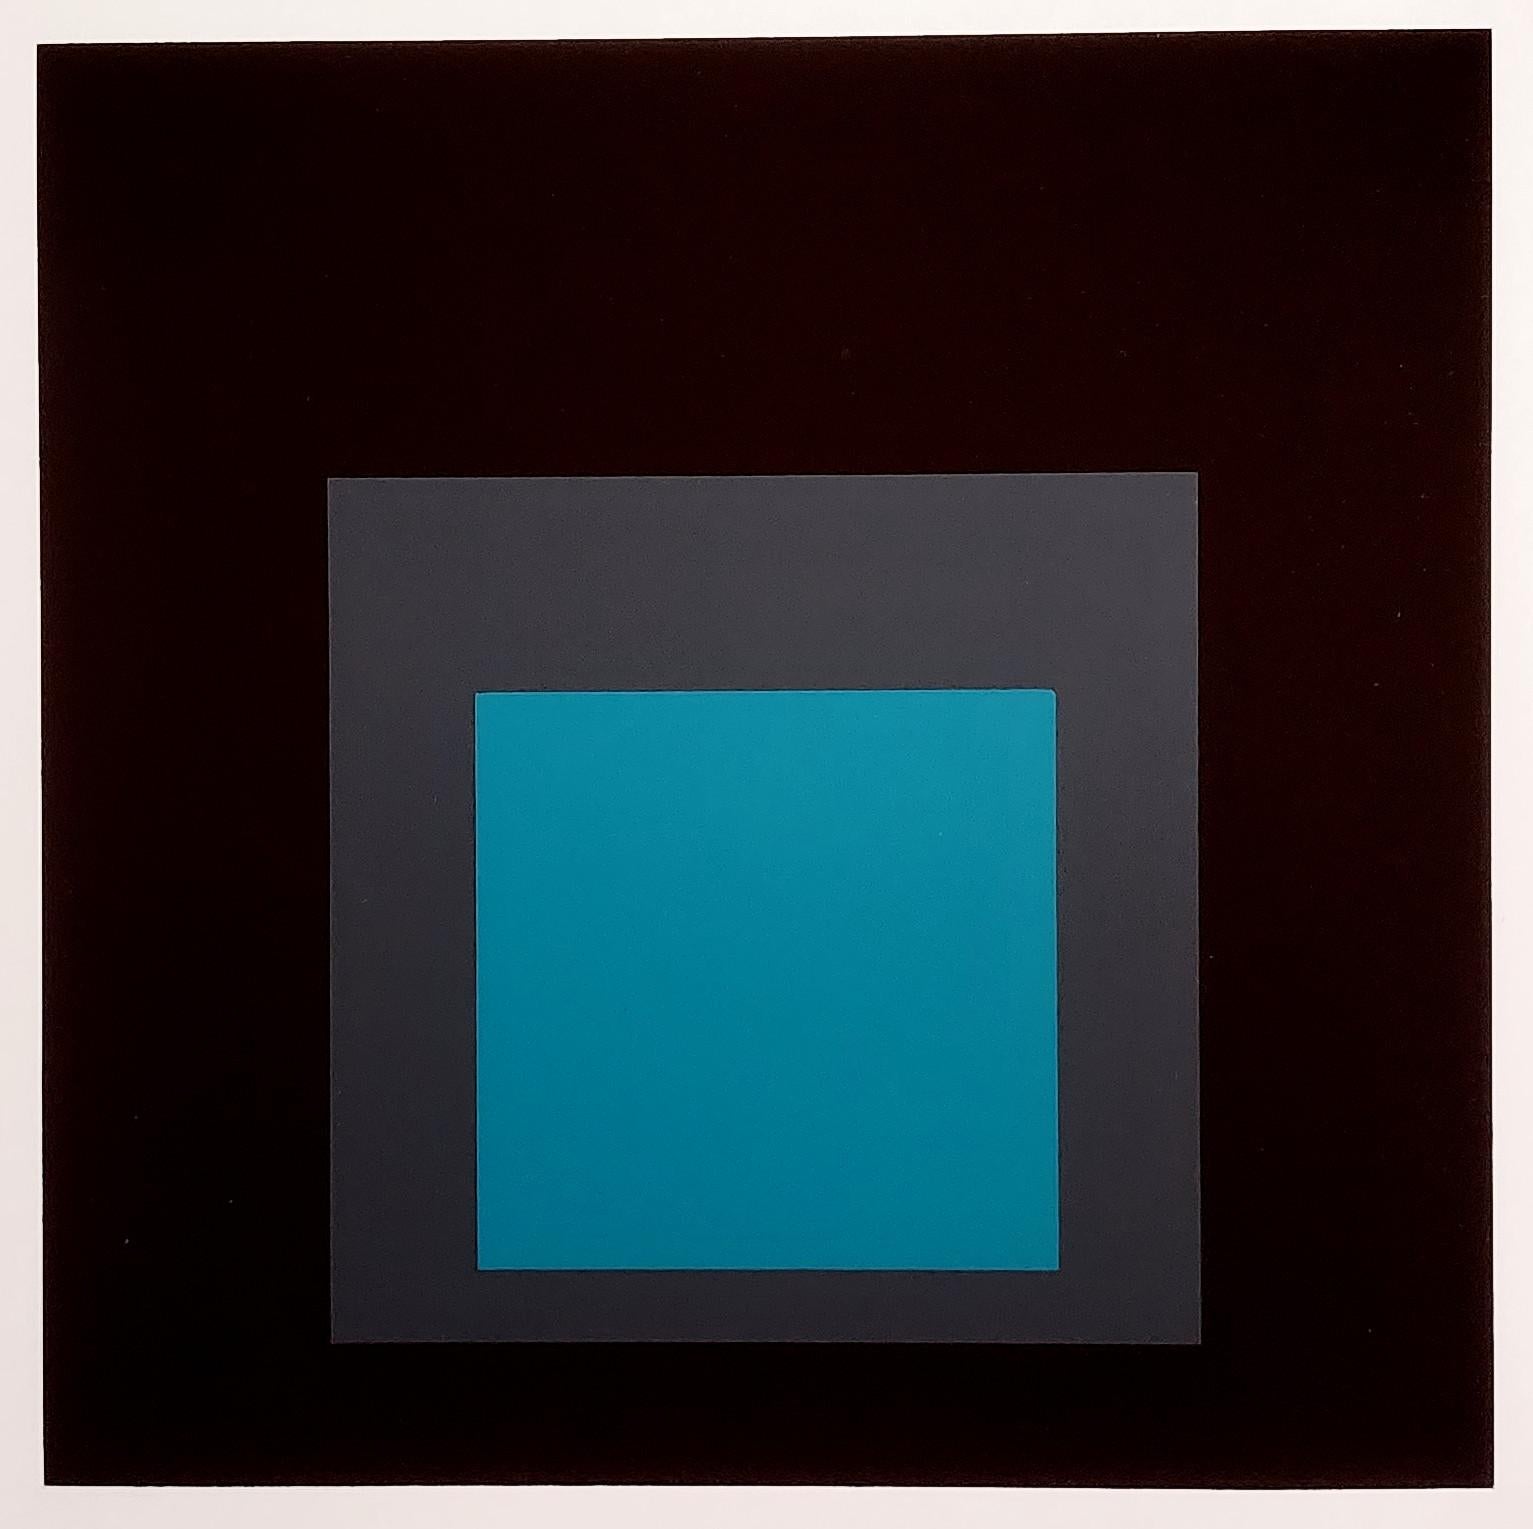 Homage to the Square: Set Off (Bauhaus, Minimalism, 50% OFF LIST PRICE) - Print by (after) Josef Albers